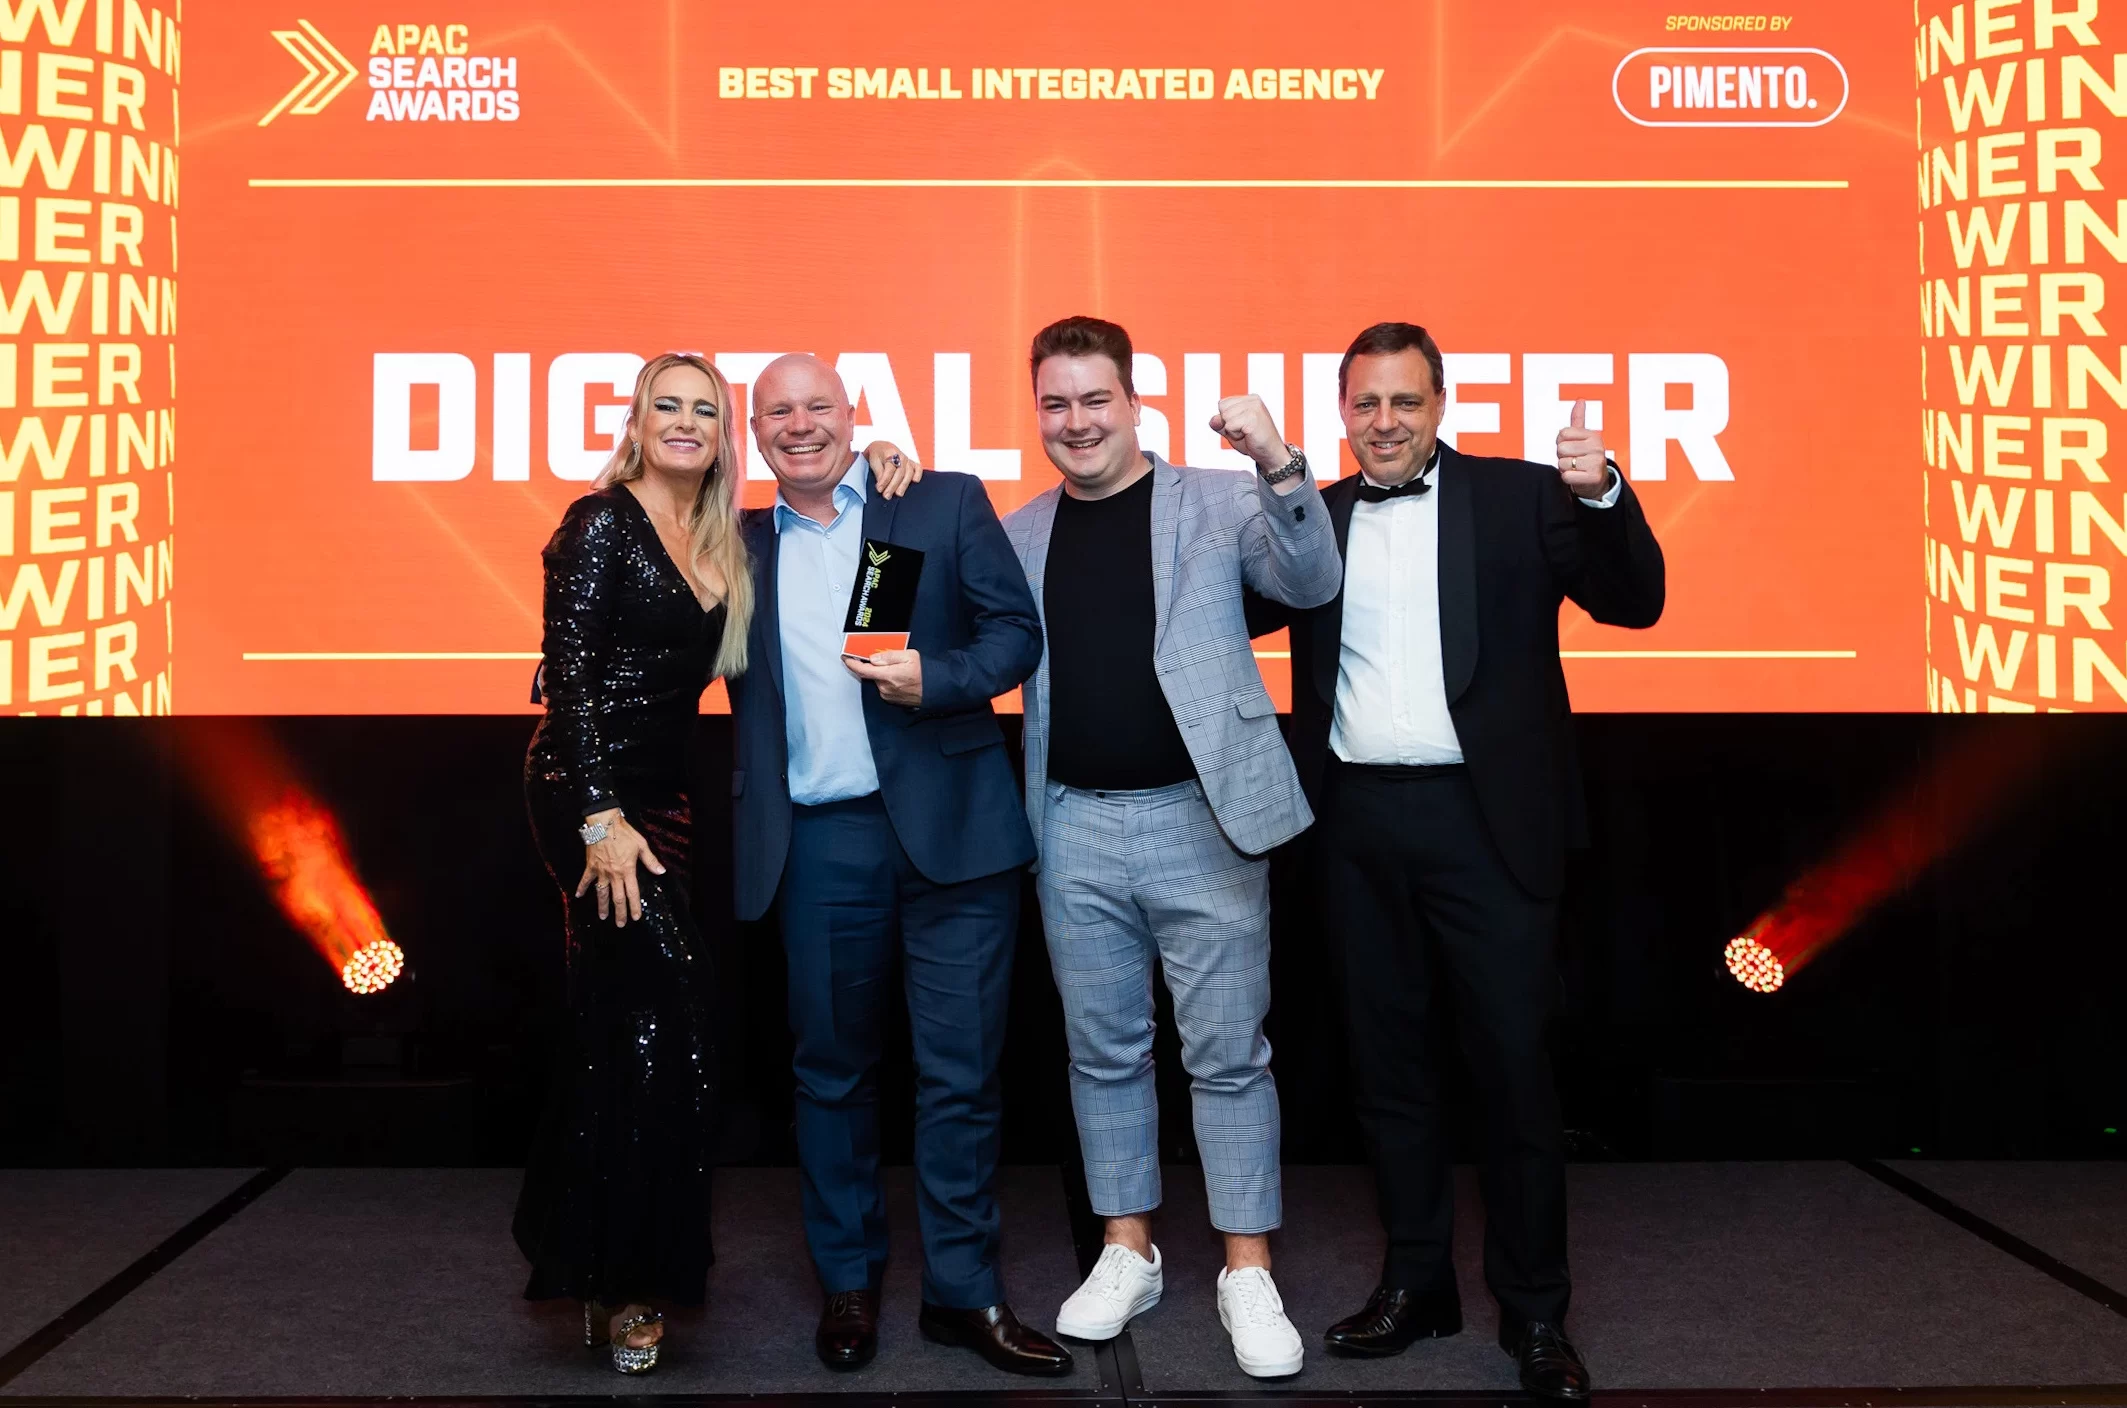 APAC Search Awards Winners - Best Small Integrated Agency